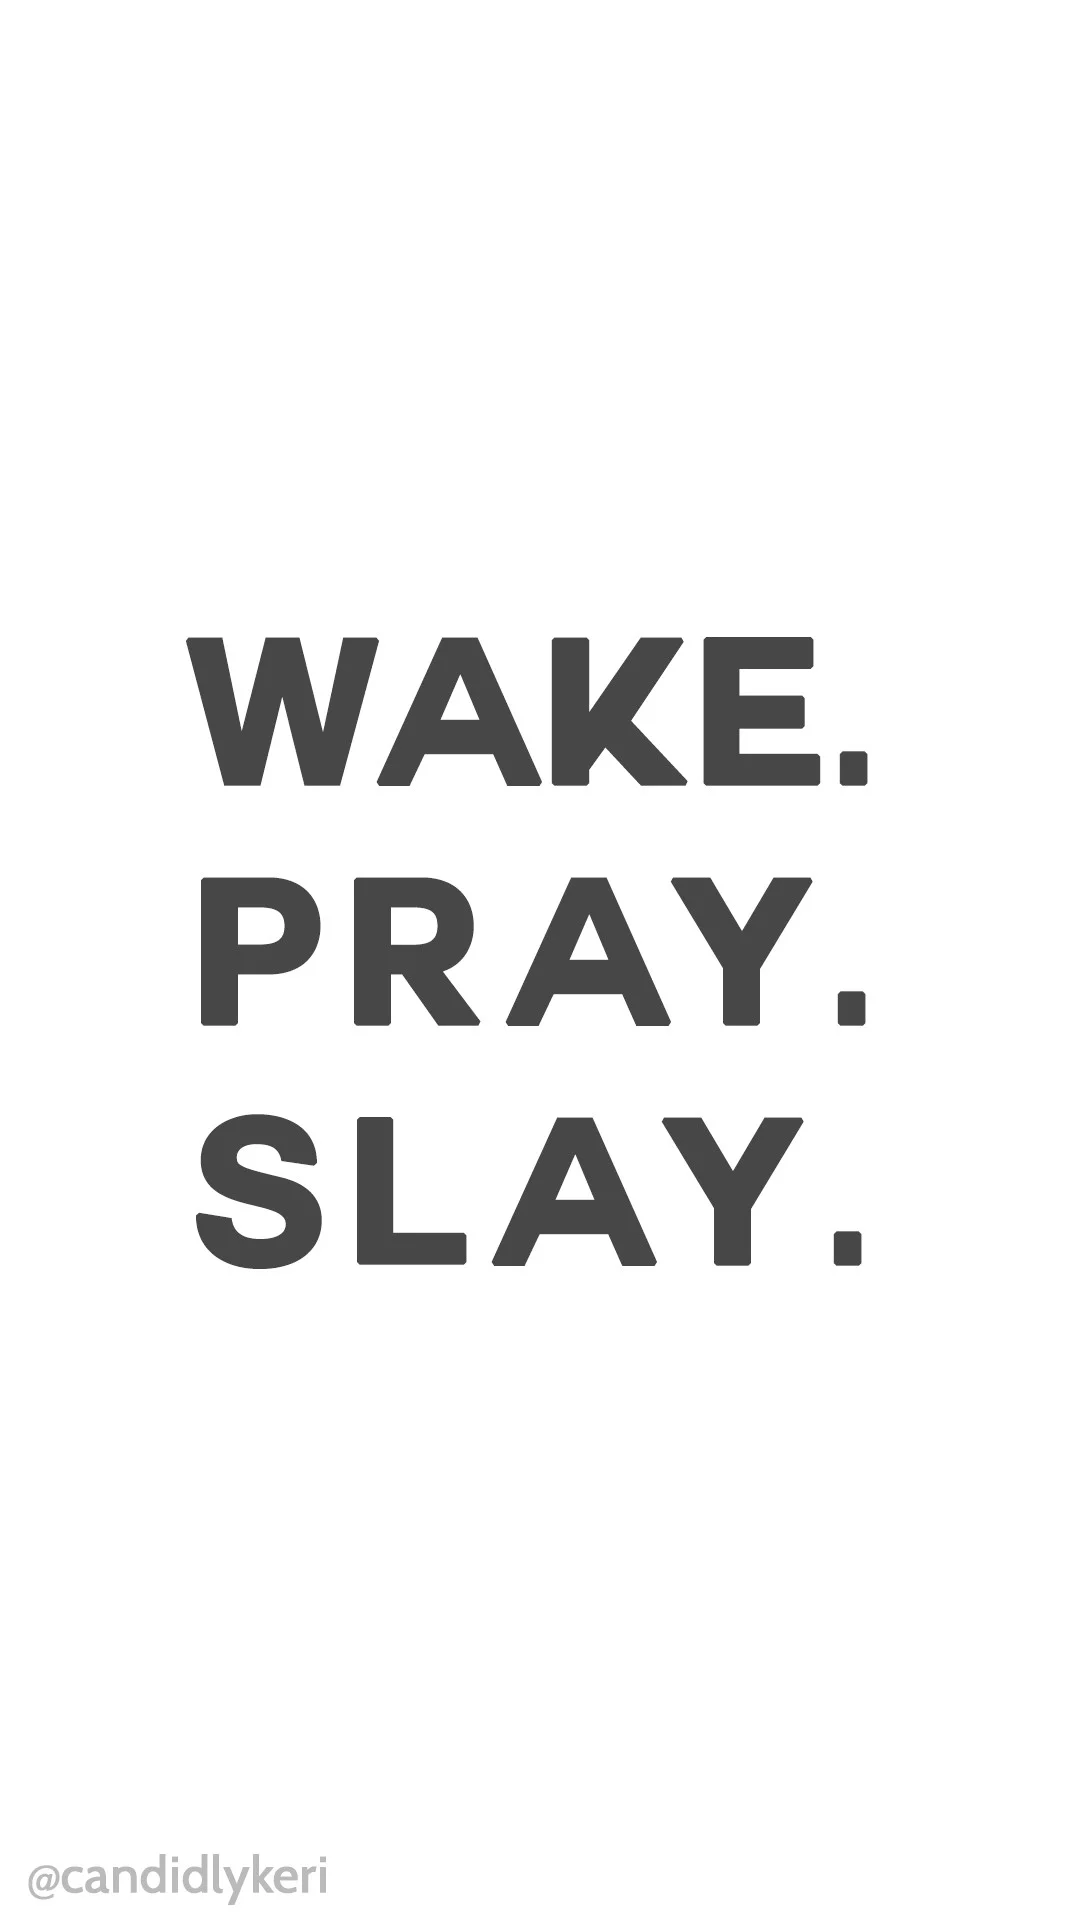 Wake Pray Slay quote motivation background wallpaper you can download for free on the blog